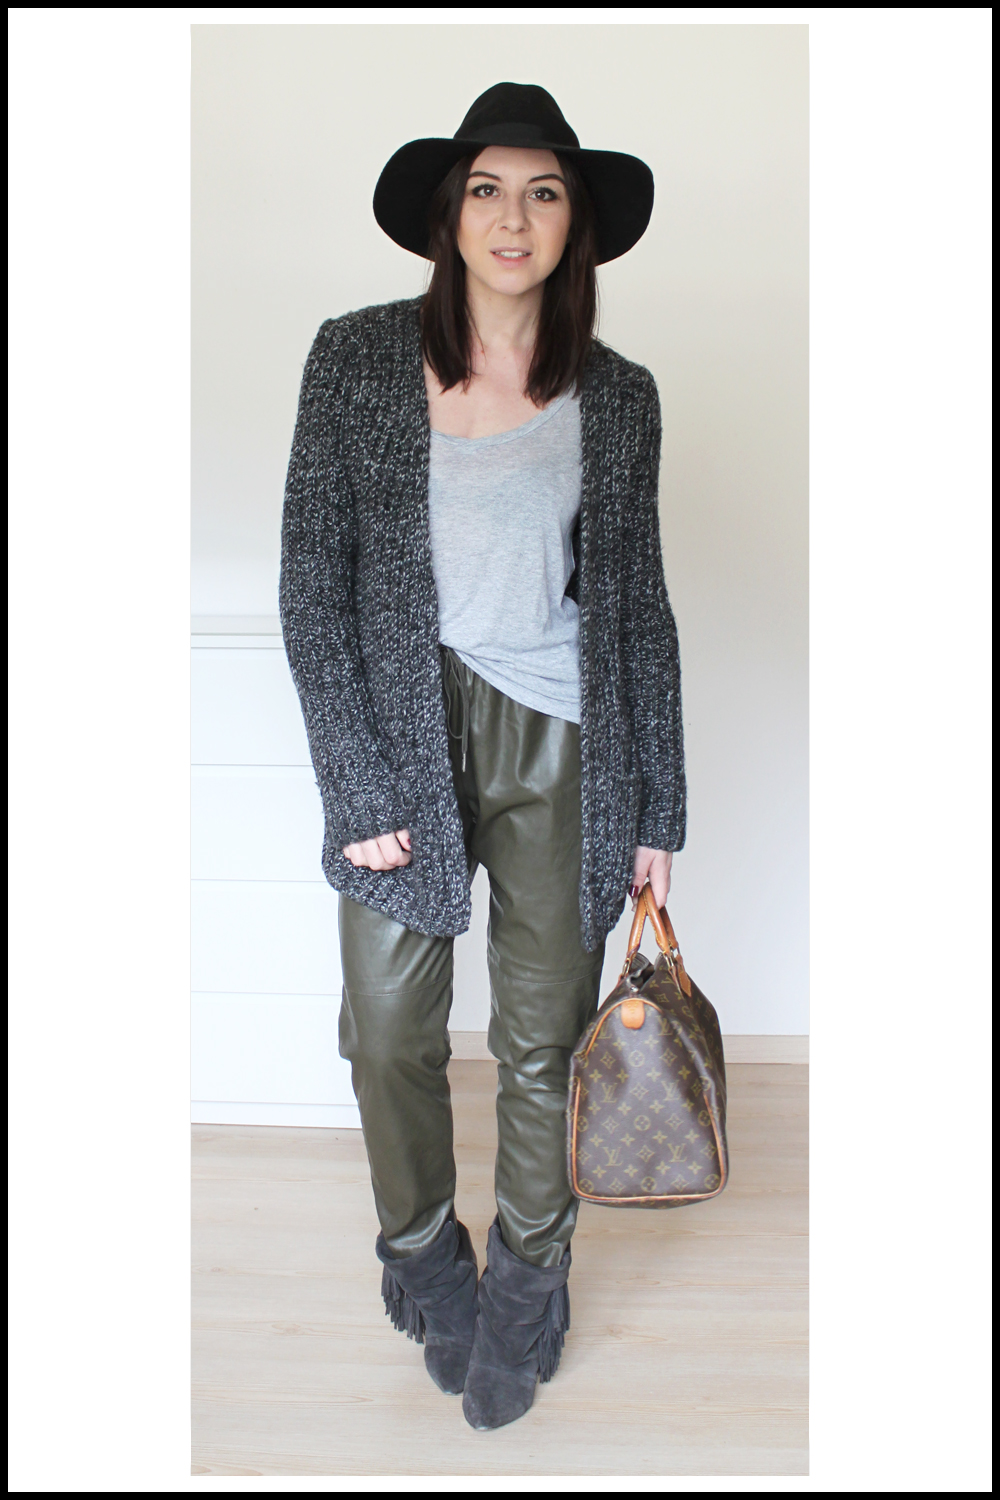 whoismocca, blogger tirol, weekly wardrobe review, fashionblog, alltagsoutfits, büro outfit, everyday look, inspiration